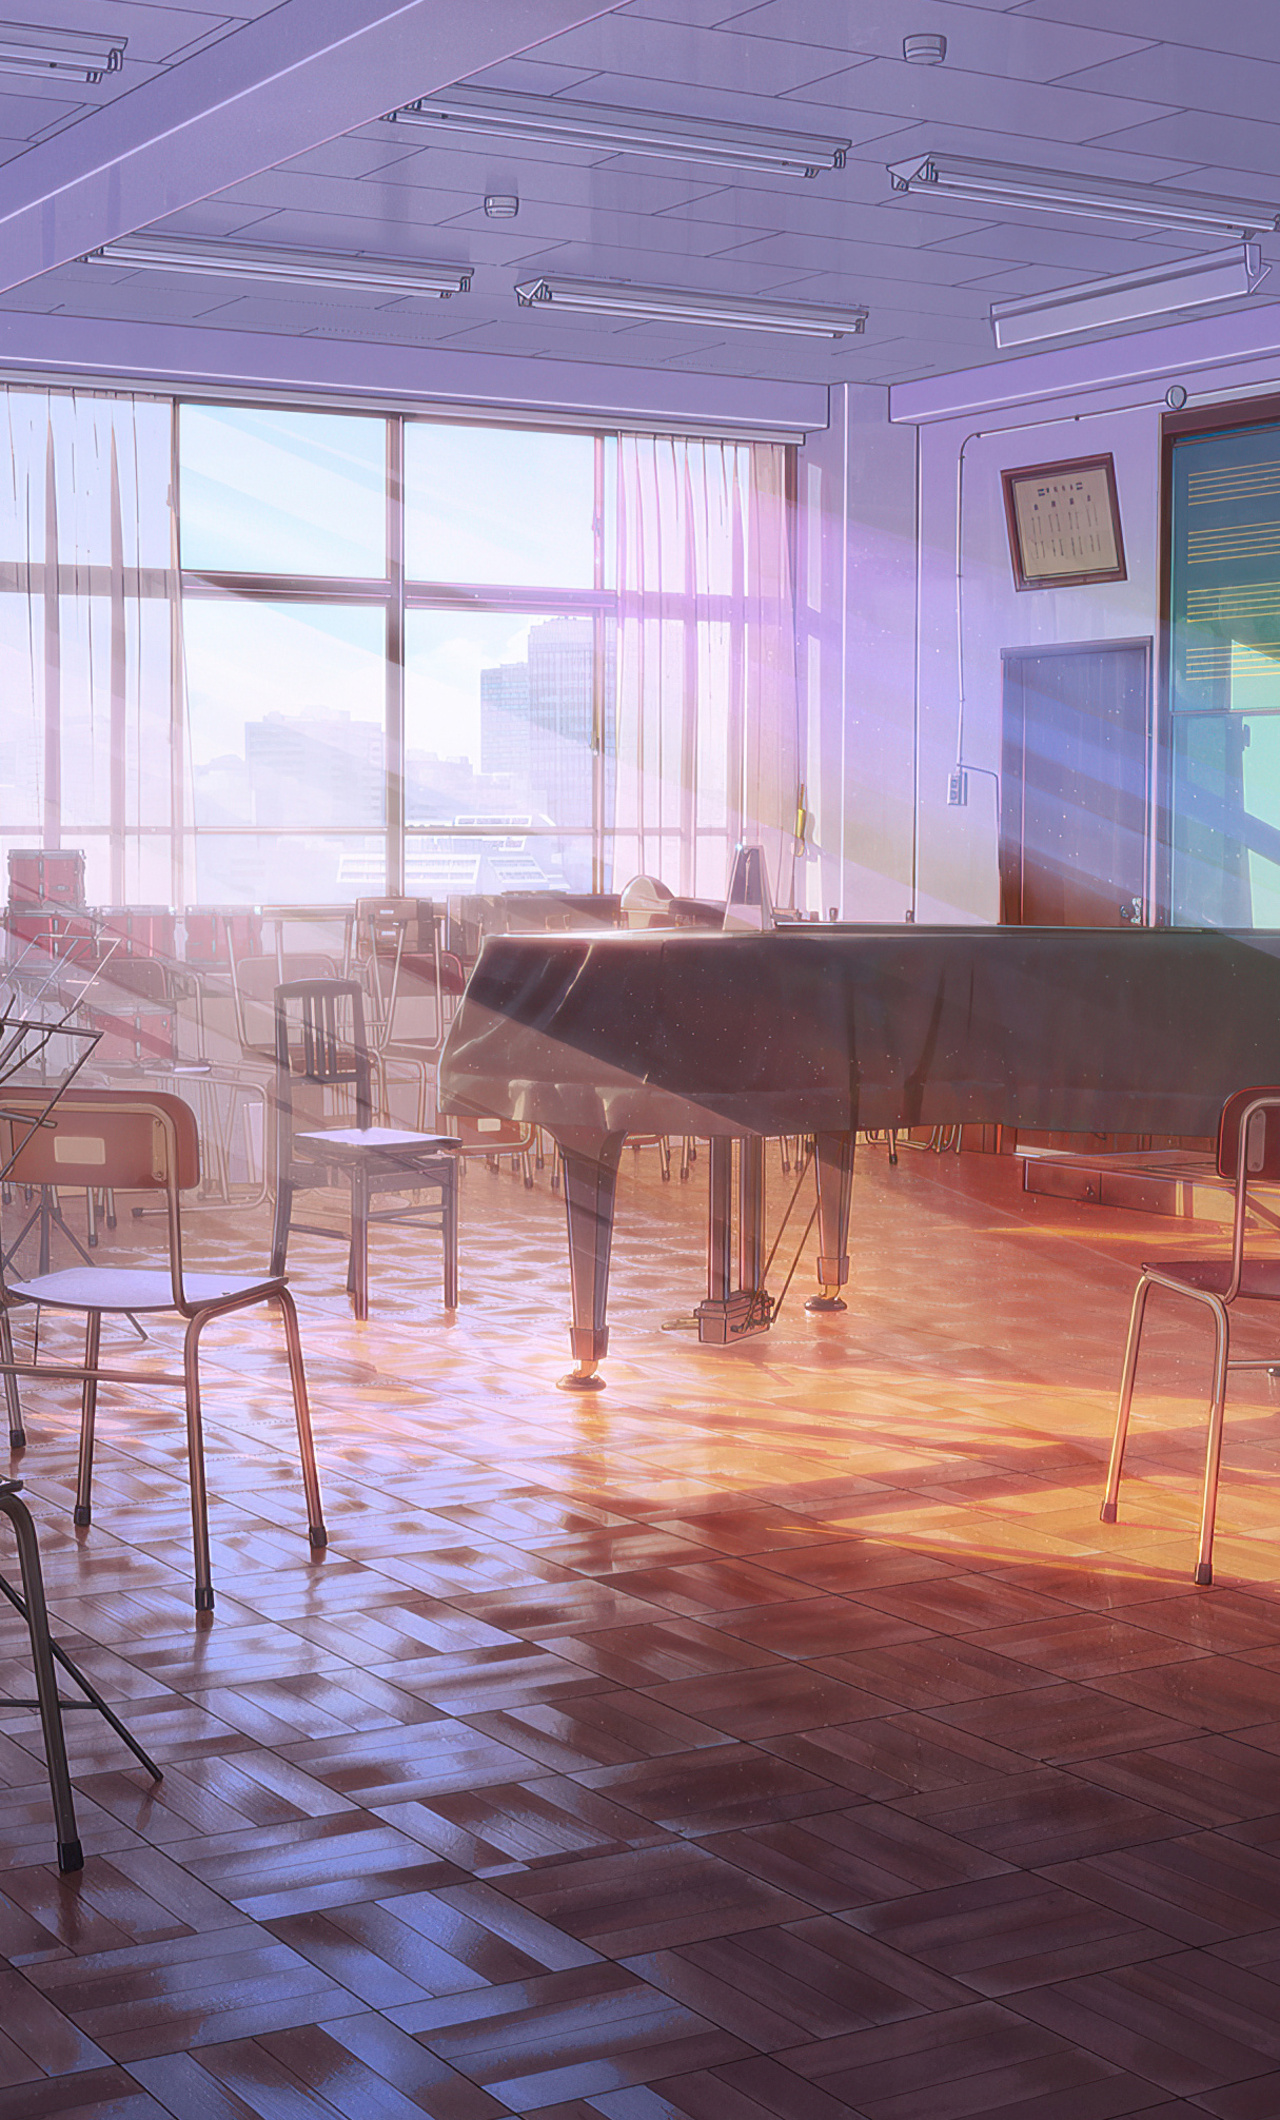 X music classroom anime k iphone hd k wallpapers images backgrounds photos and pictures